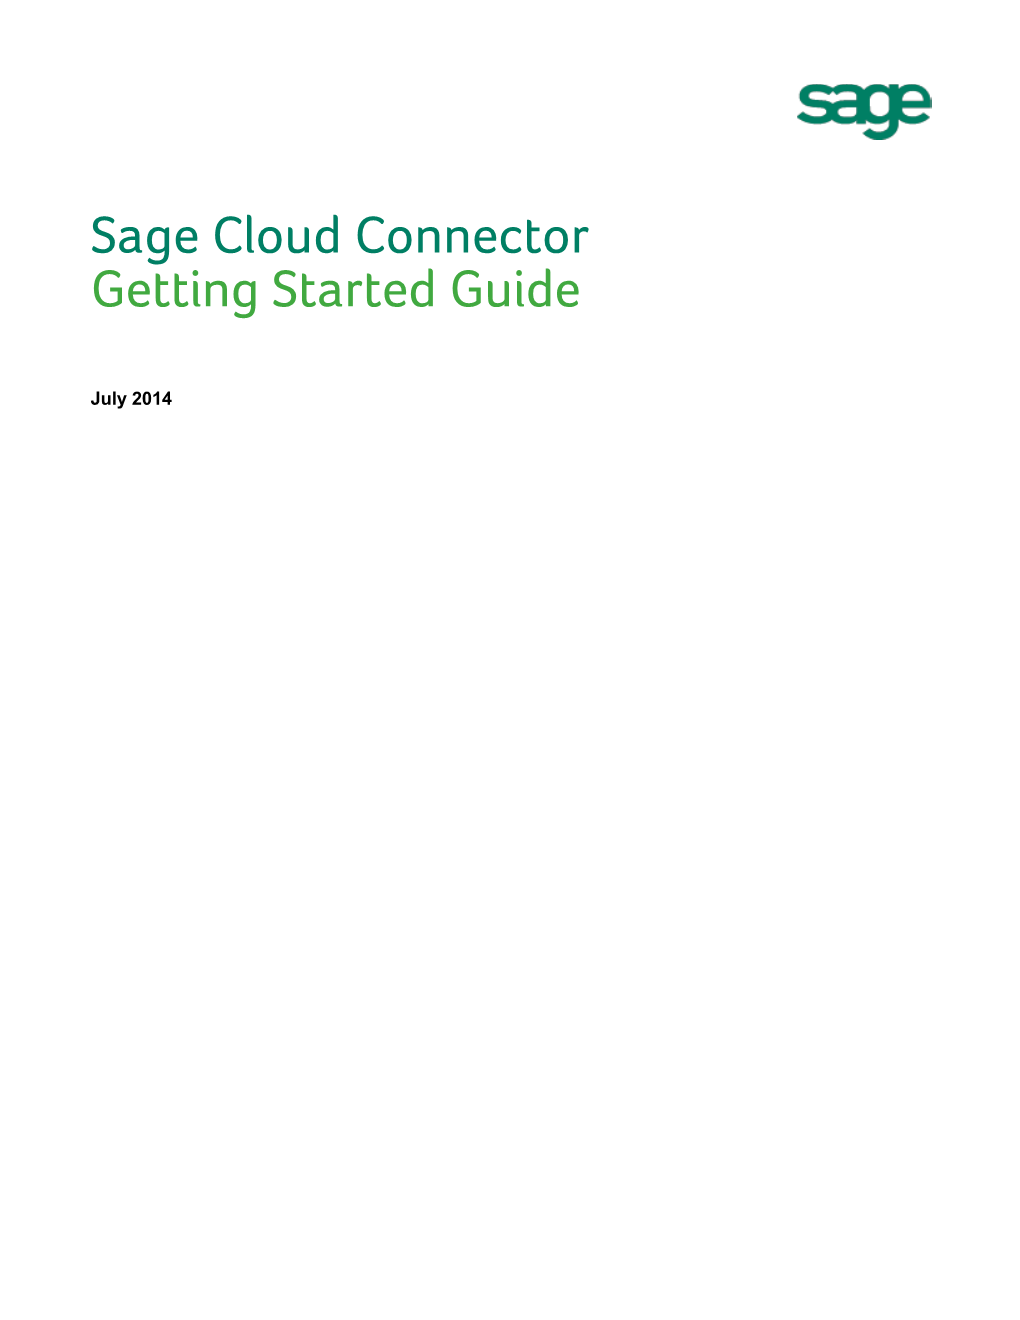 Sage Cloud Connector Getting Started Guide